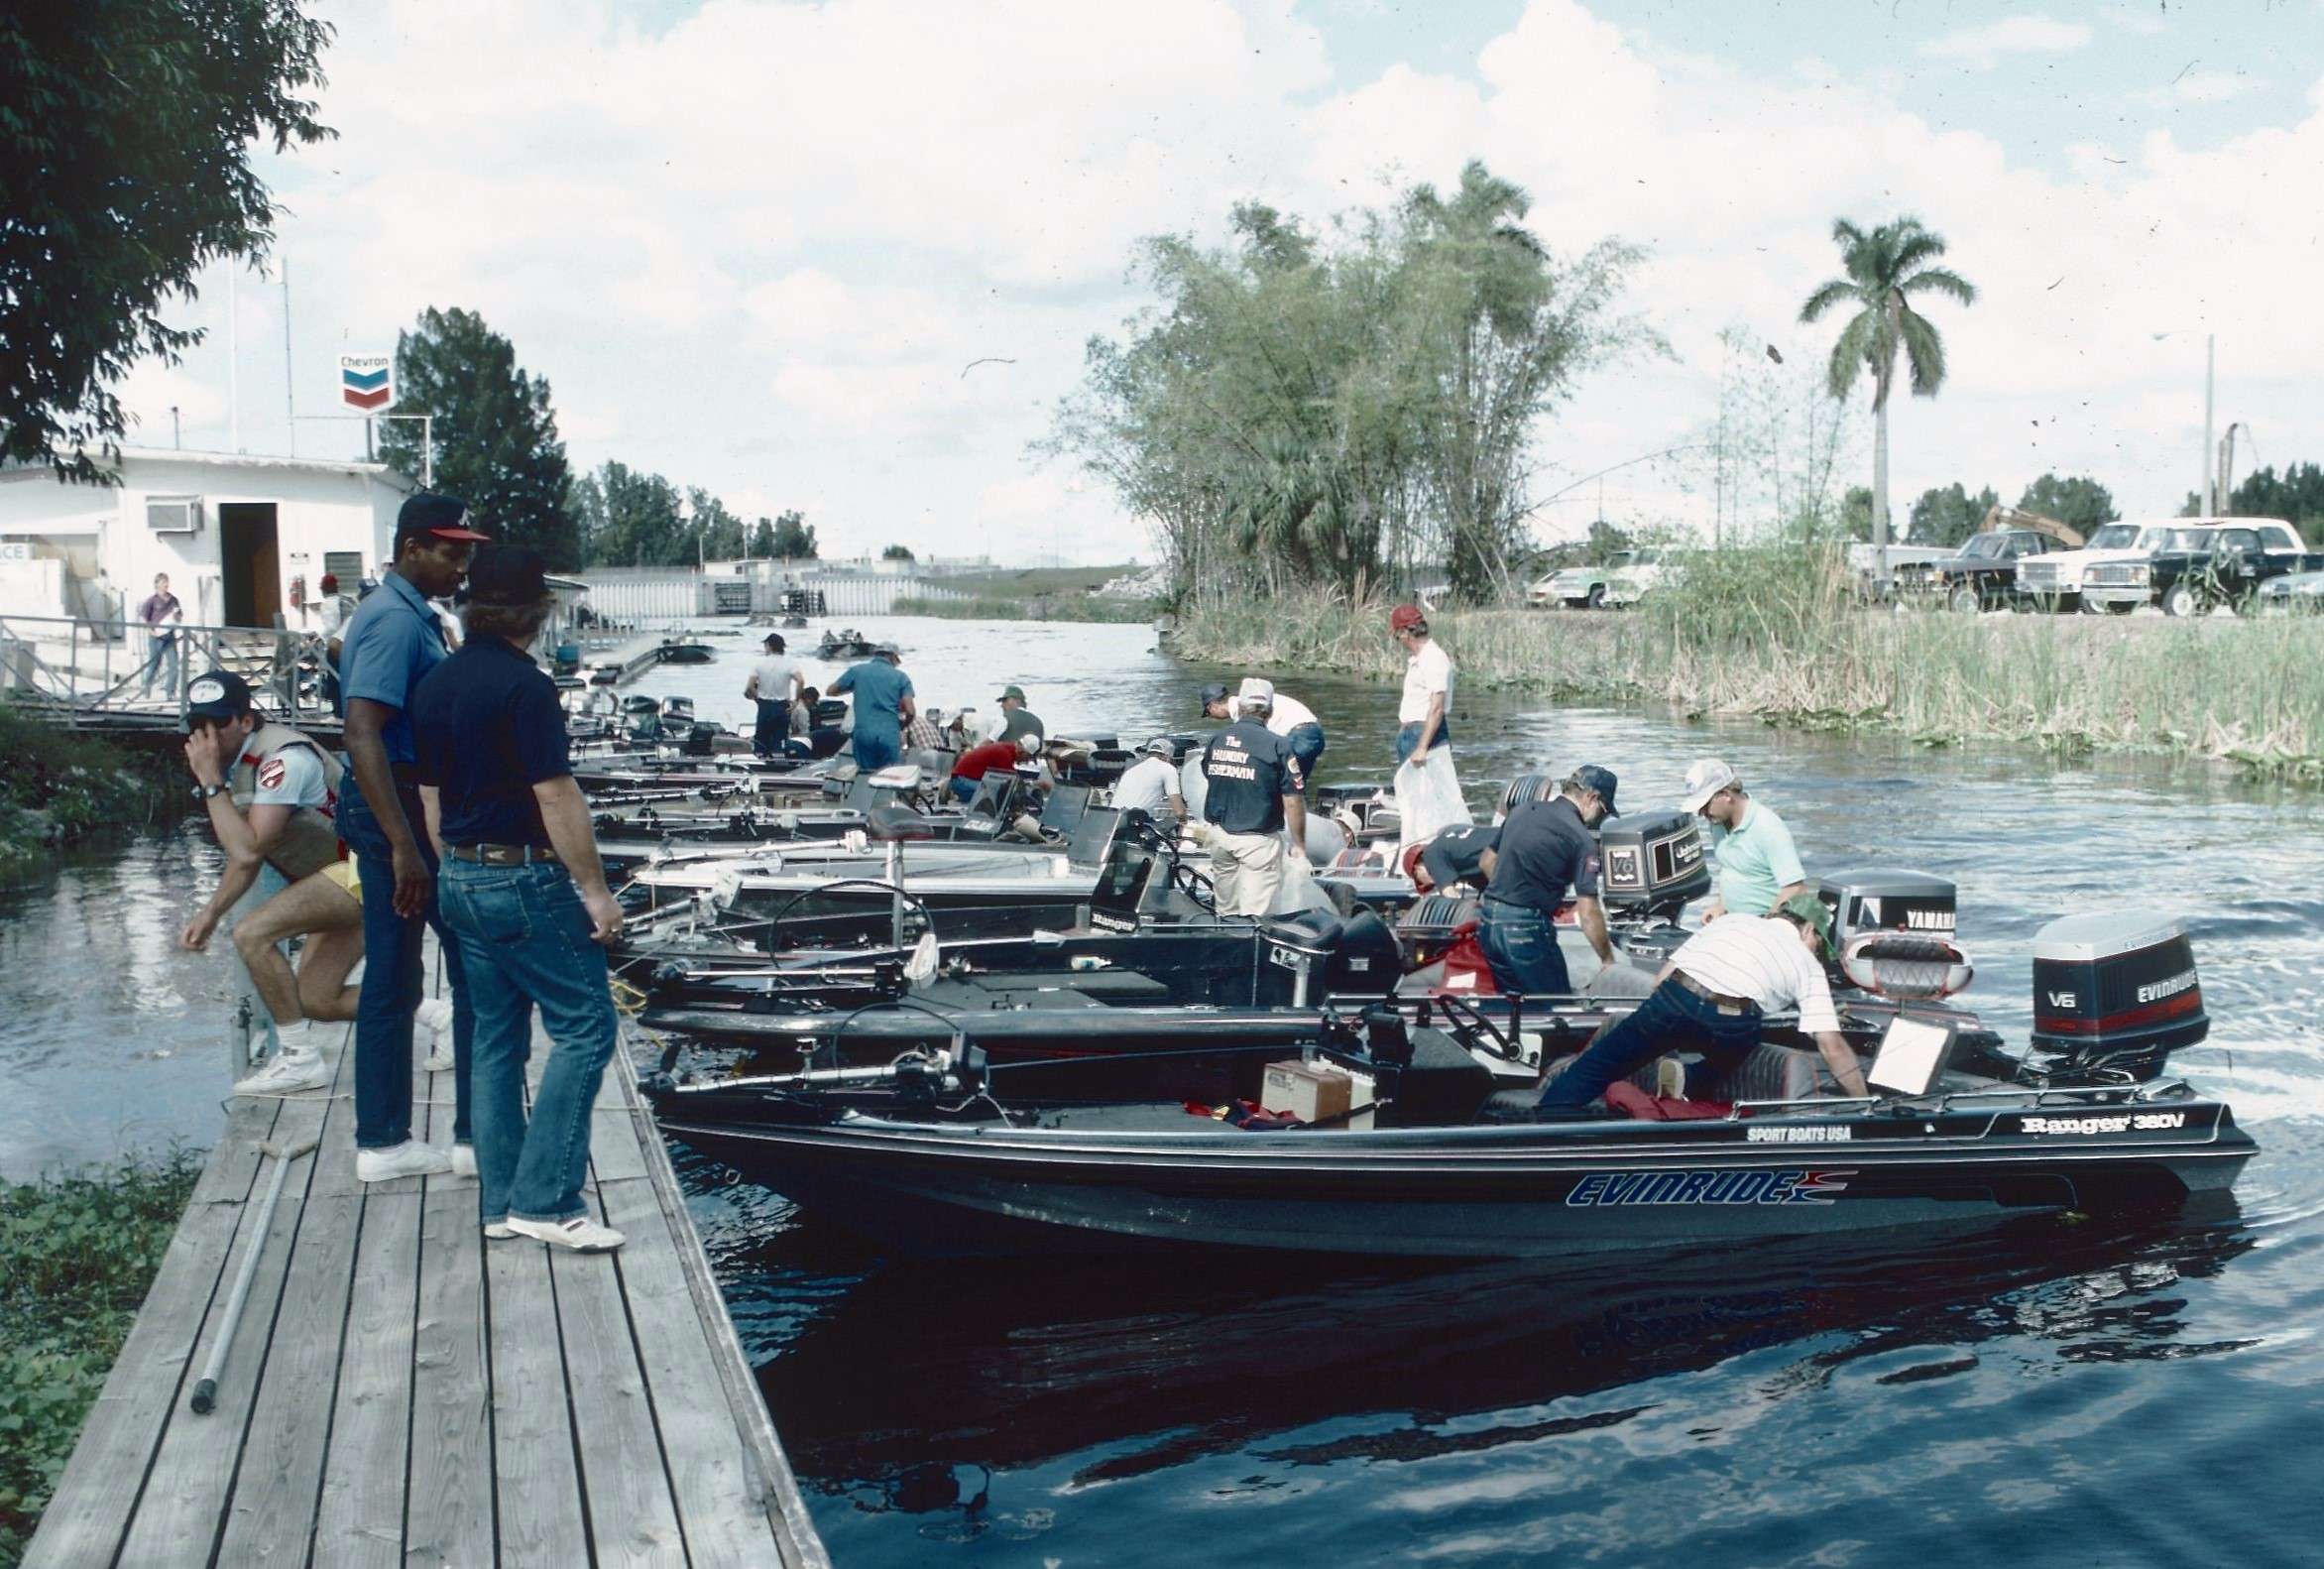   <b>1987 TOP 100 SUPER B.A.S.S. PRO-AM:</b> Twenty years after the first Bassmaster event on Beaver Lake, Ray Scott and Dewey Kendrick created a change in bass fishing events that since has become the norm. In the 1987 Top 100 Super B.A.S.S. Pro-Am on Lake Okeechobee, professional anglers were paired with amateurs for the first time.